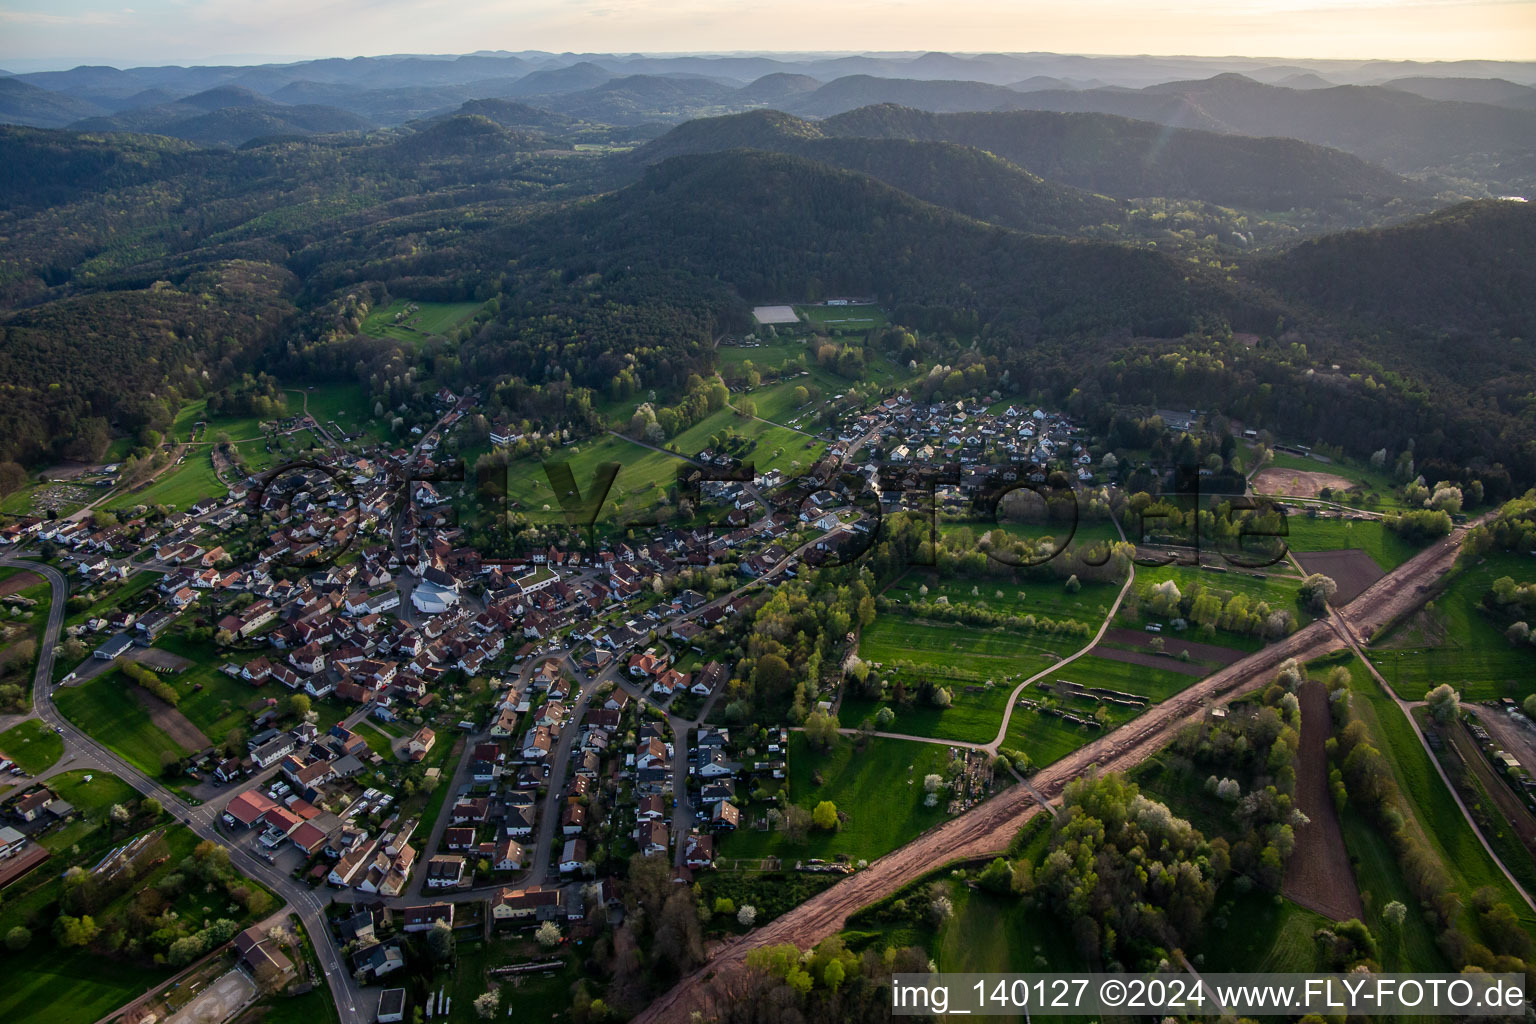 Aerial view of Path through the Palatinate Forest to rebuild the 51 km section of the Trans-Europe Natural Gas Pipeline (TENP-III from the Netherlands to Switzerland) between Mittelbrunn and Klingenmünster in the district Gossersweiler in Gossersweiler-Stein in the state Rhineland-Palatinate, Germany